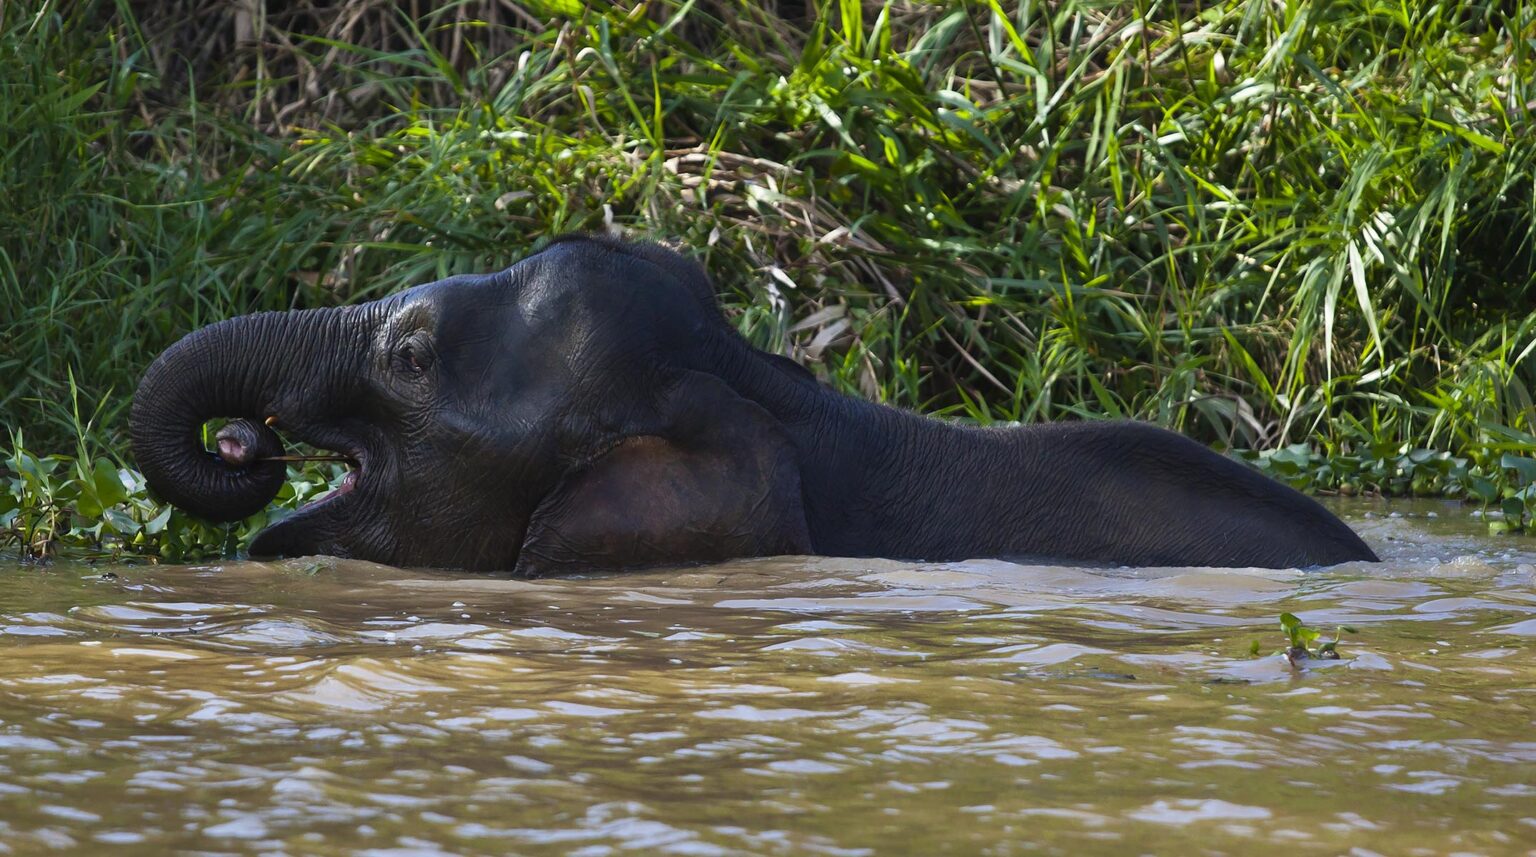 A BORNEAN PYGMY ELEPHANT (Elephas maximus borneensis) swims in the river while eating in the KINABATANGAN RIVER WILDLIFE SANCTUARY - SABAH, BORNEO